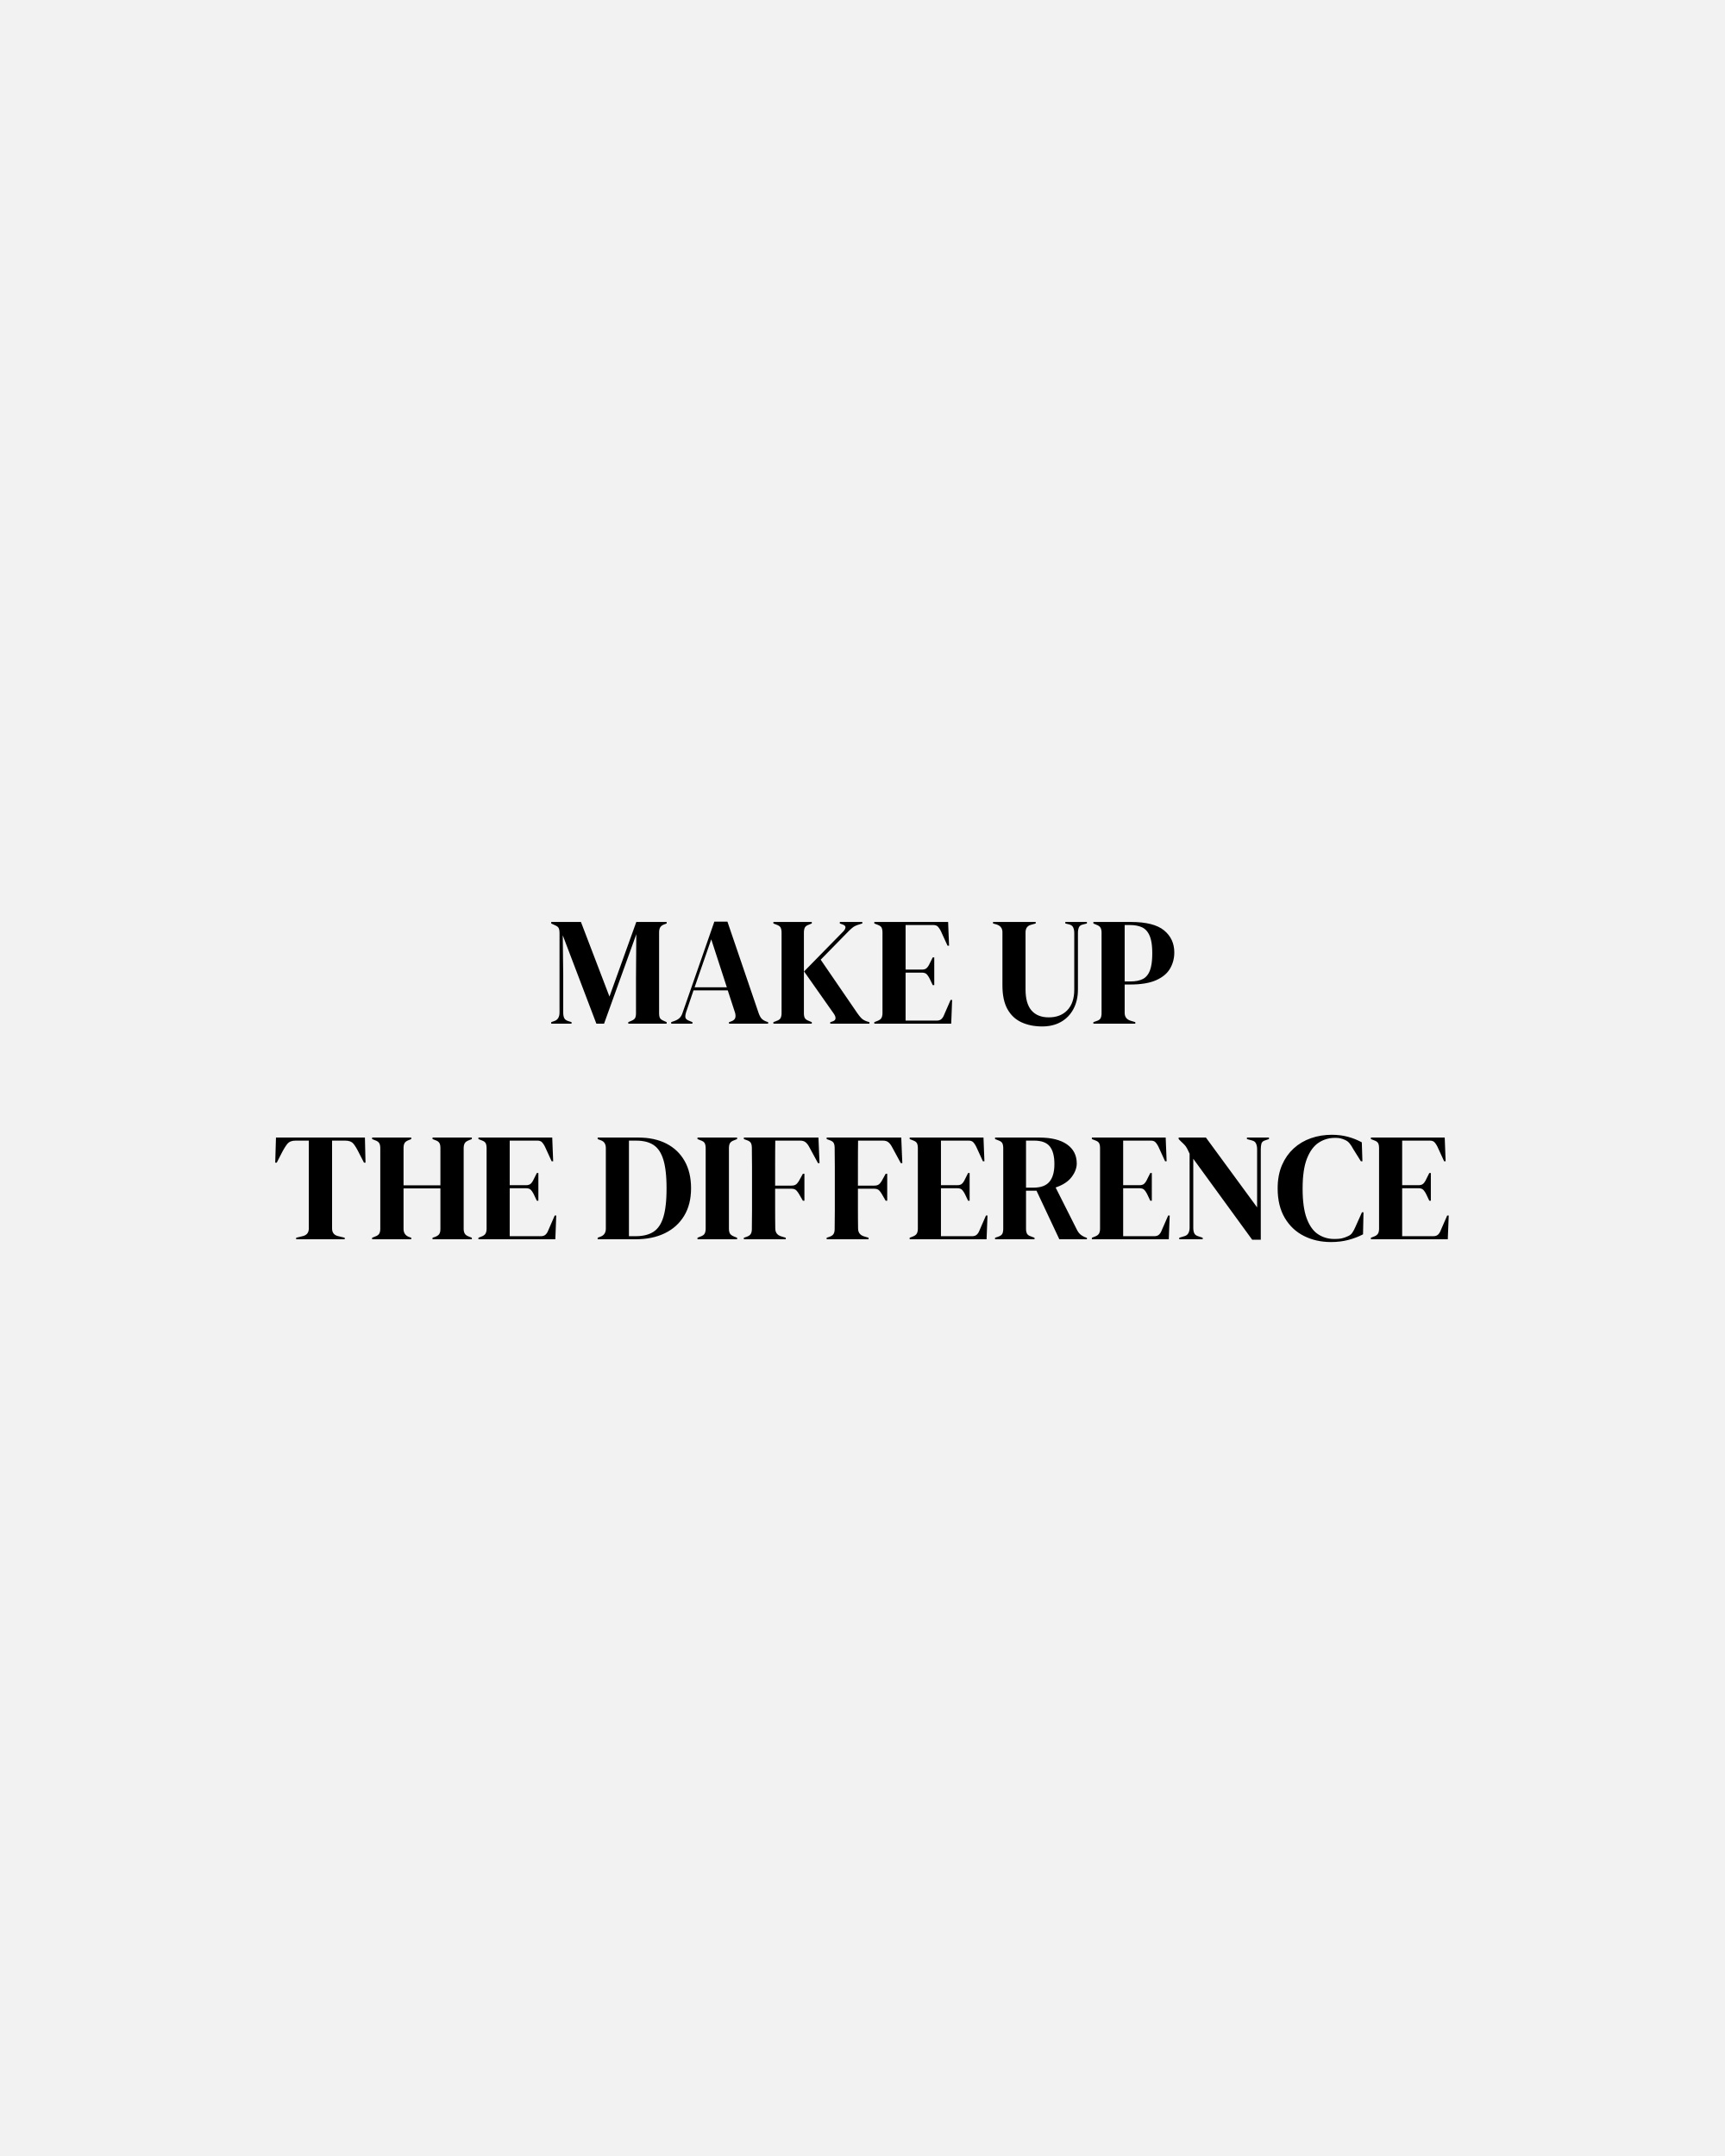 For make up the difference